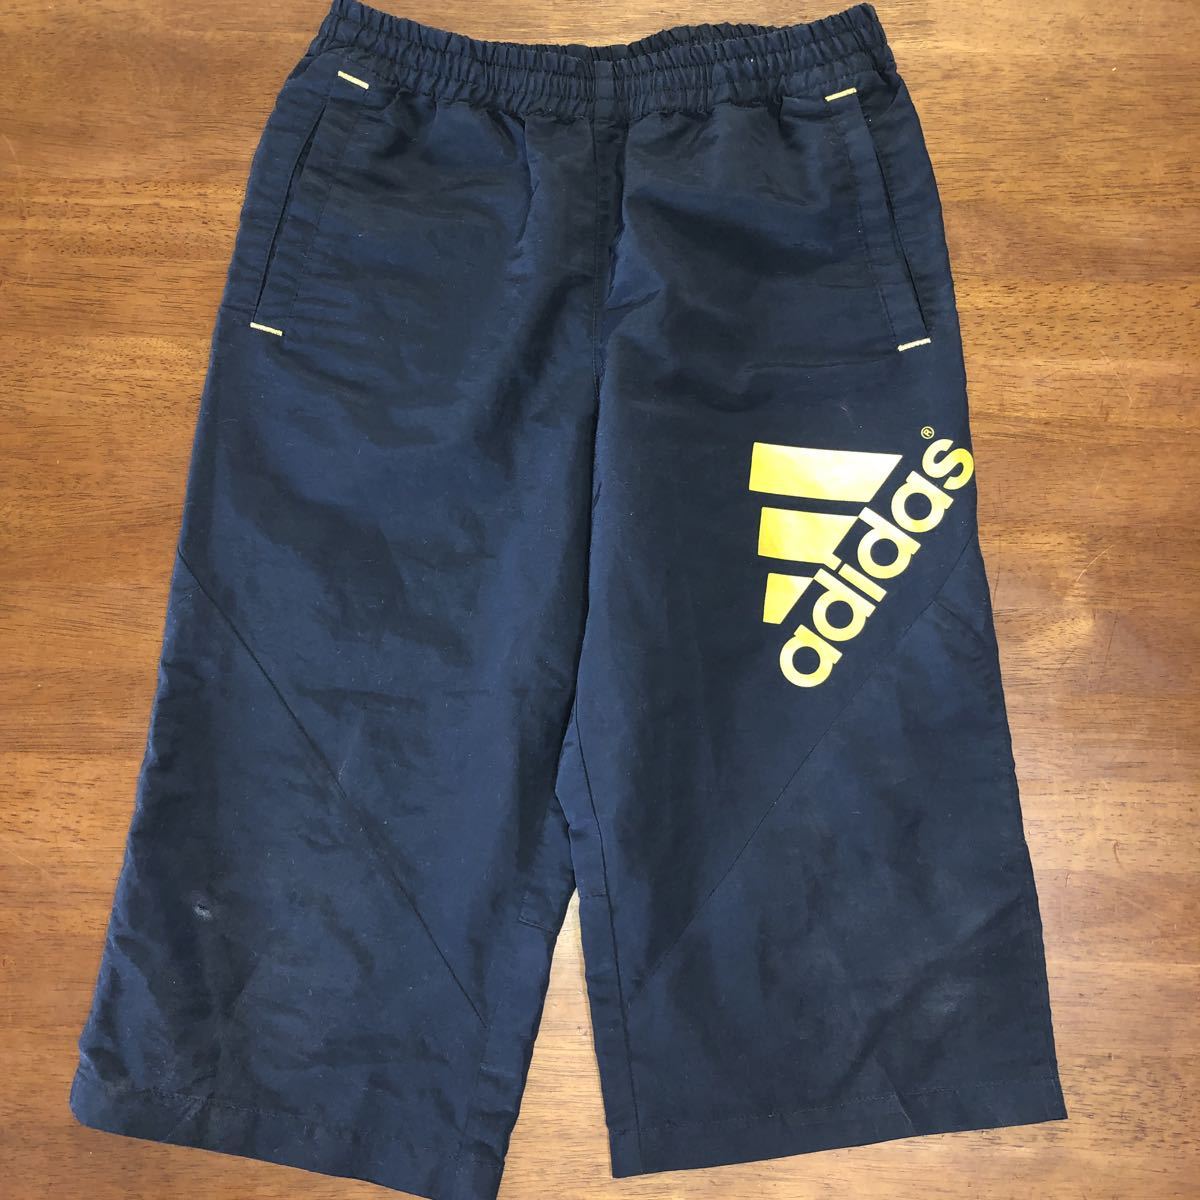 [adidas/ Adidas ] T-shirt shorts top and bottom 2 pieces set 150.140. used sport wear training 